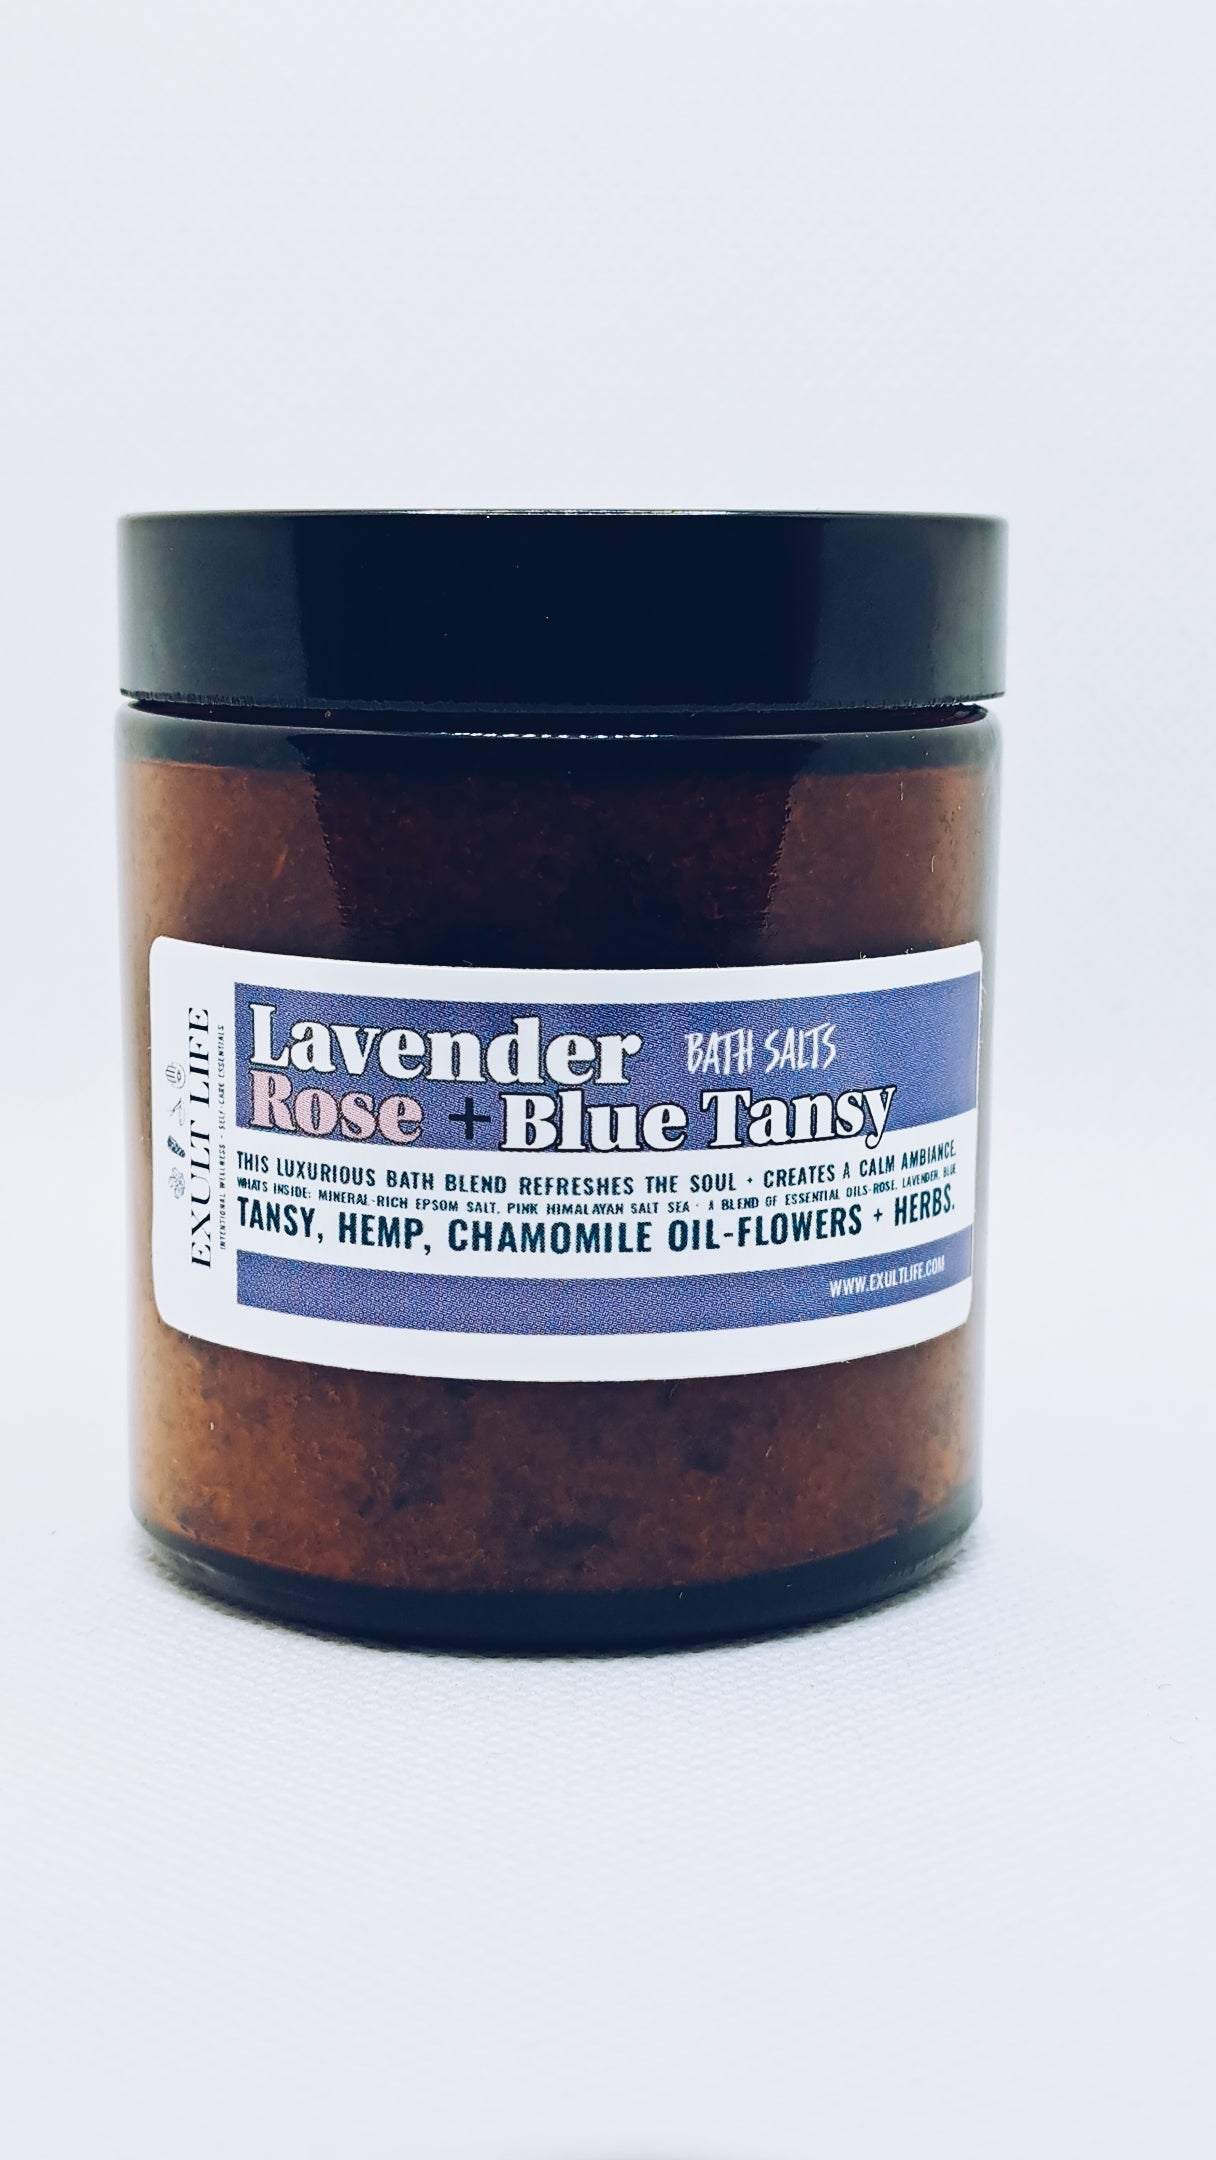 Our luxurious botanical infused bath salt soaks are formulated with nourishing essential oils folded into Epsom and Himalayan salts to exfoliate the skin. This is a 4oz jar and can be used for your bath or for a heavenly foot soak.